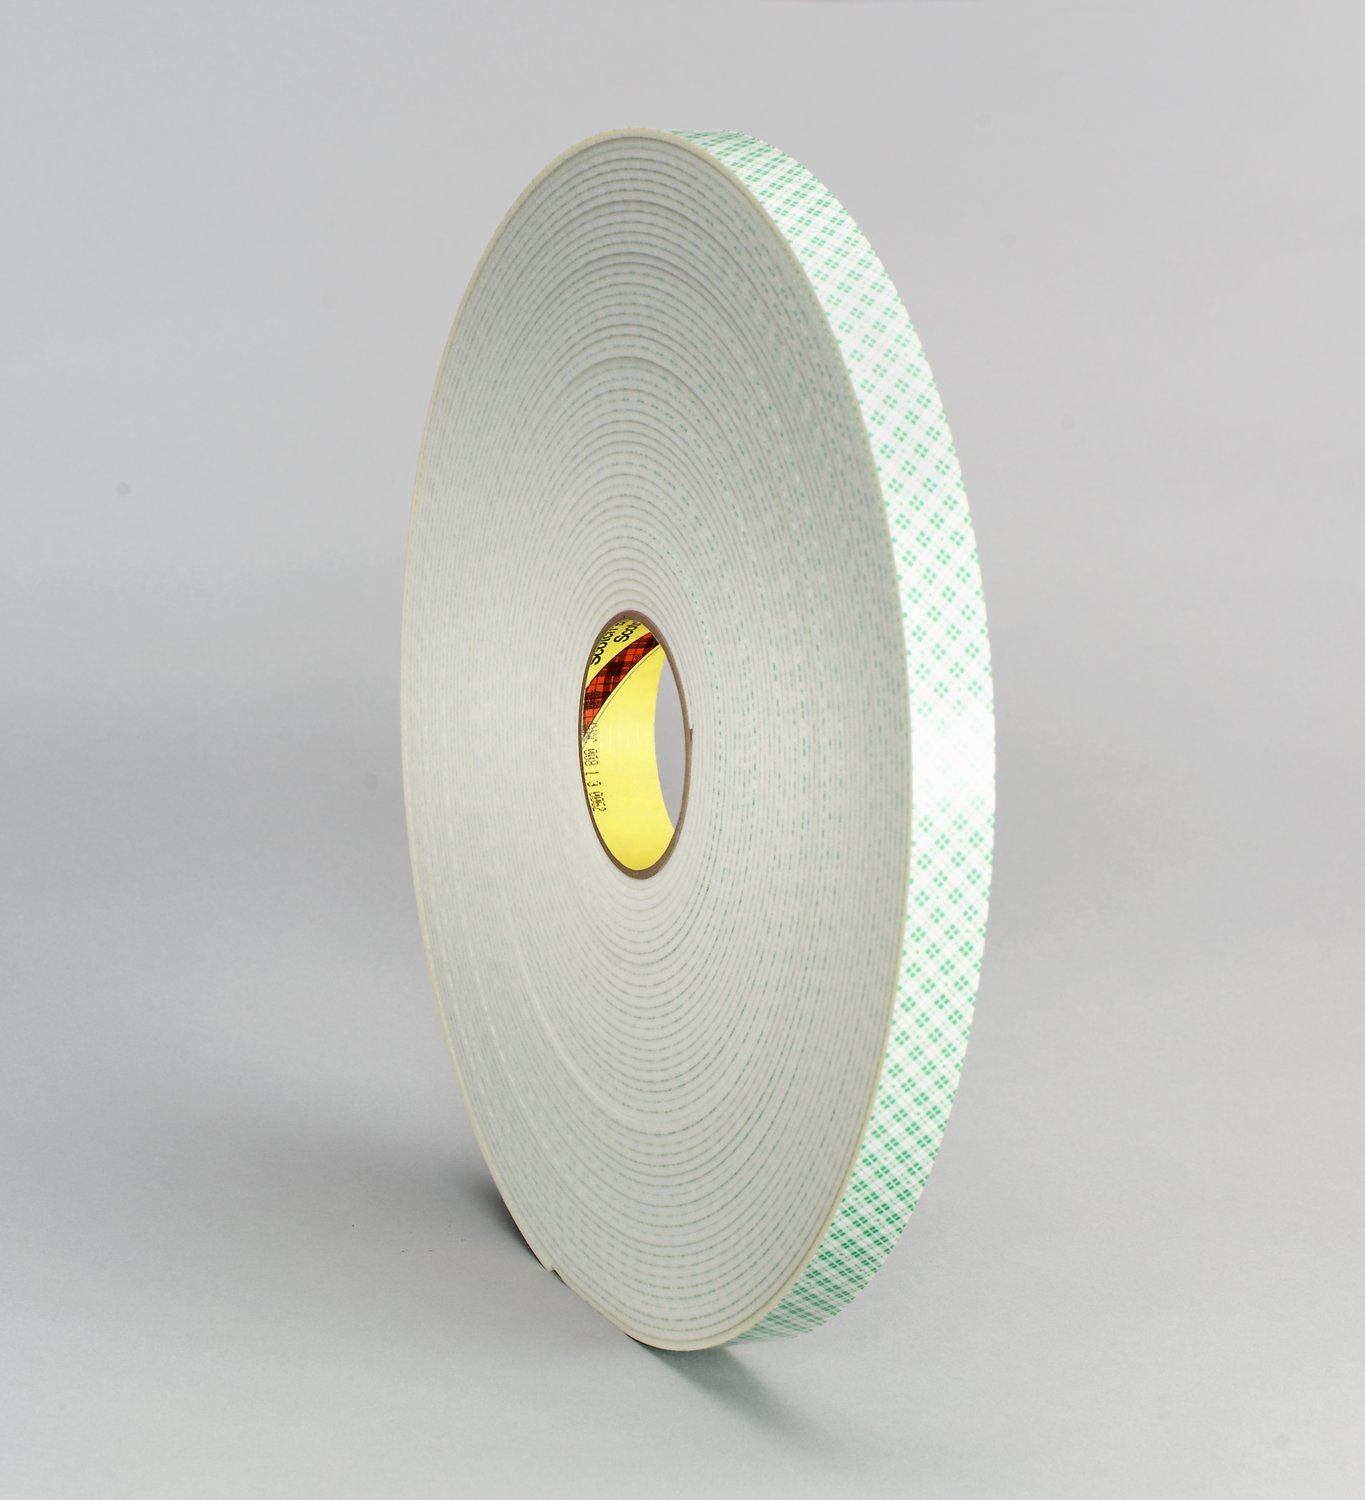 7010373668 - 3M Double Coated Urethane Foam Tape 4008, Off White, 12 in x 36 yd, 125
mil, 1 roll per case